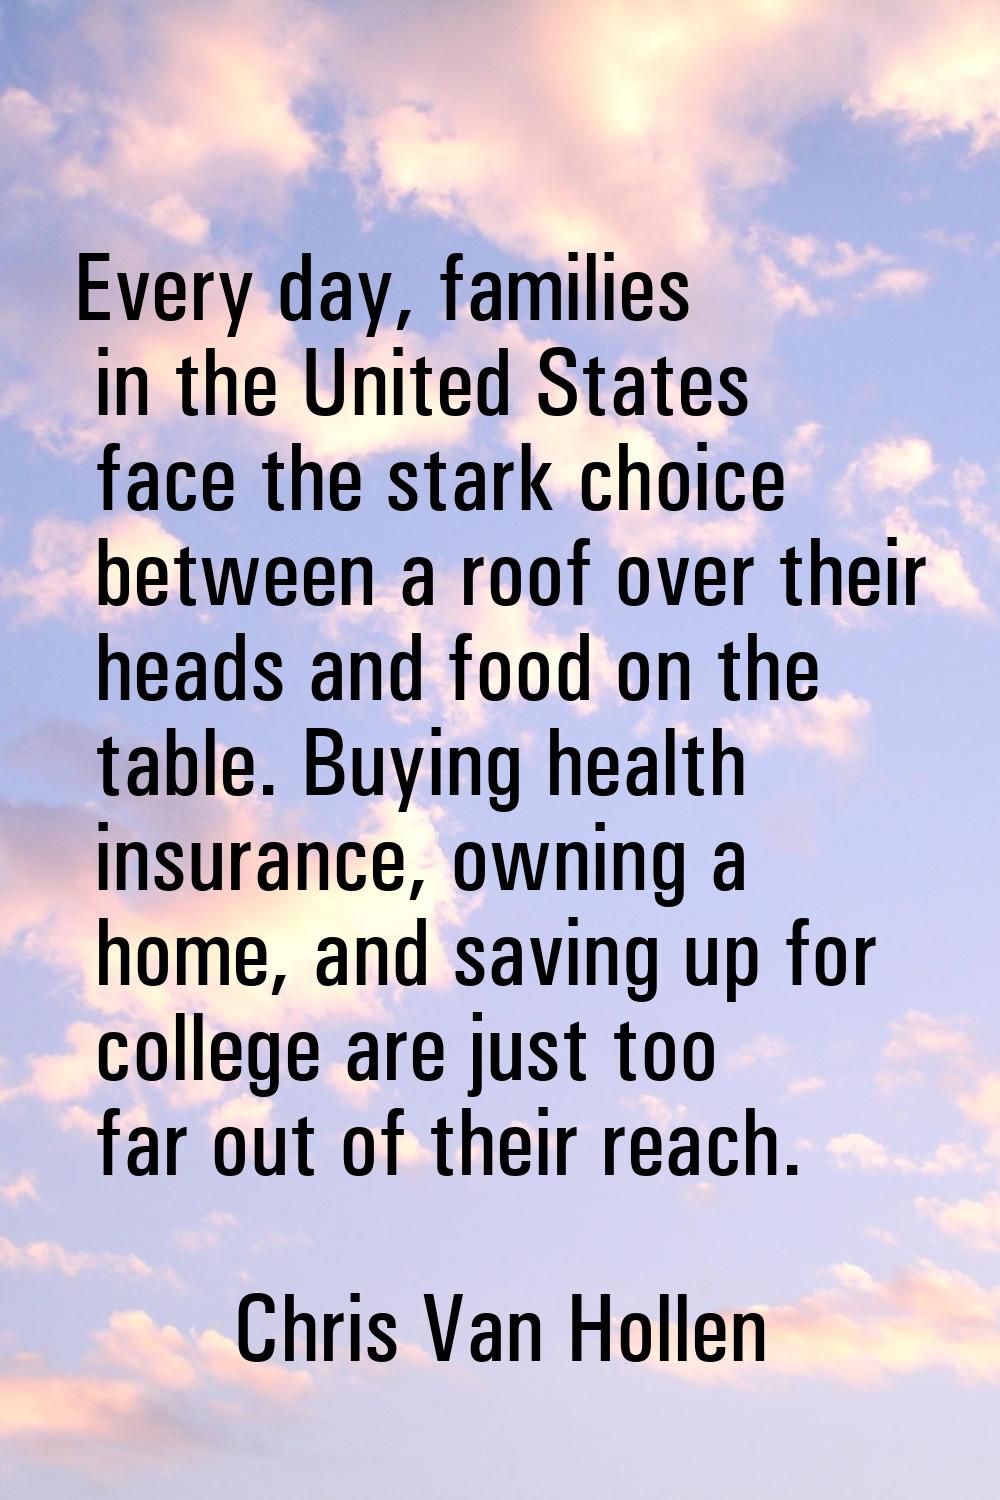 Every day, families in the United States face the stark choice between a roof over their heads and 